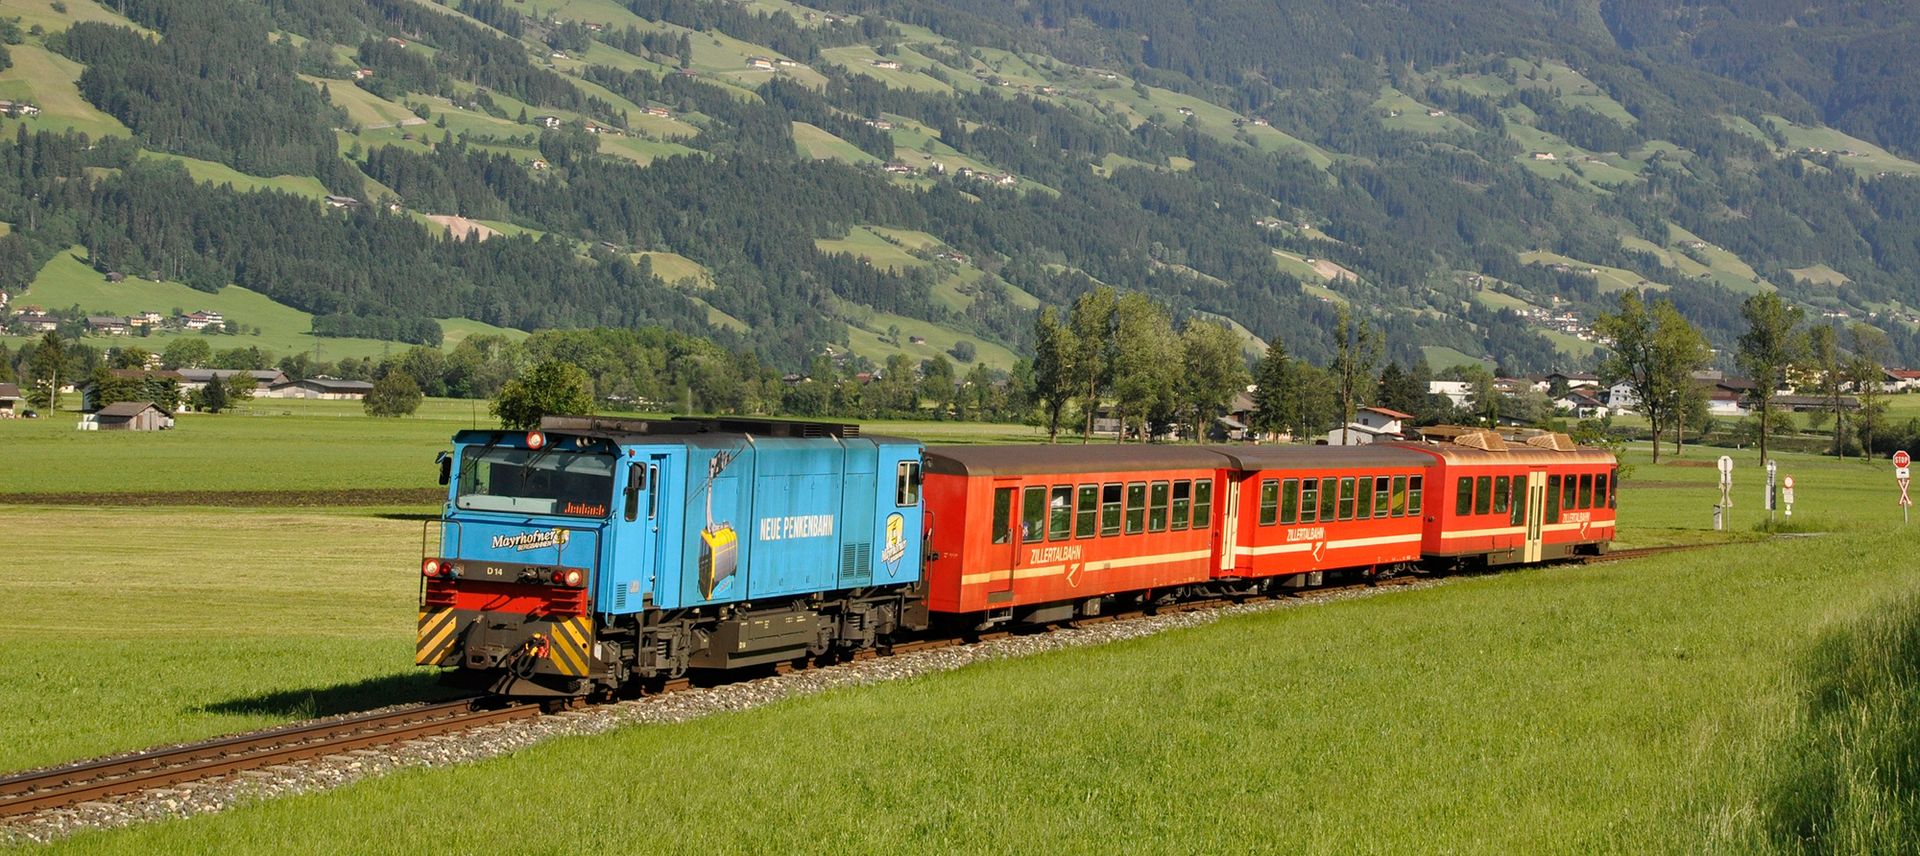 Travelling to the Ziller Valley by Zillertal train